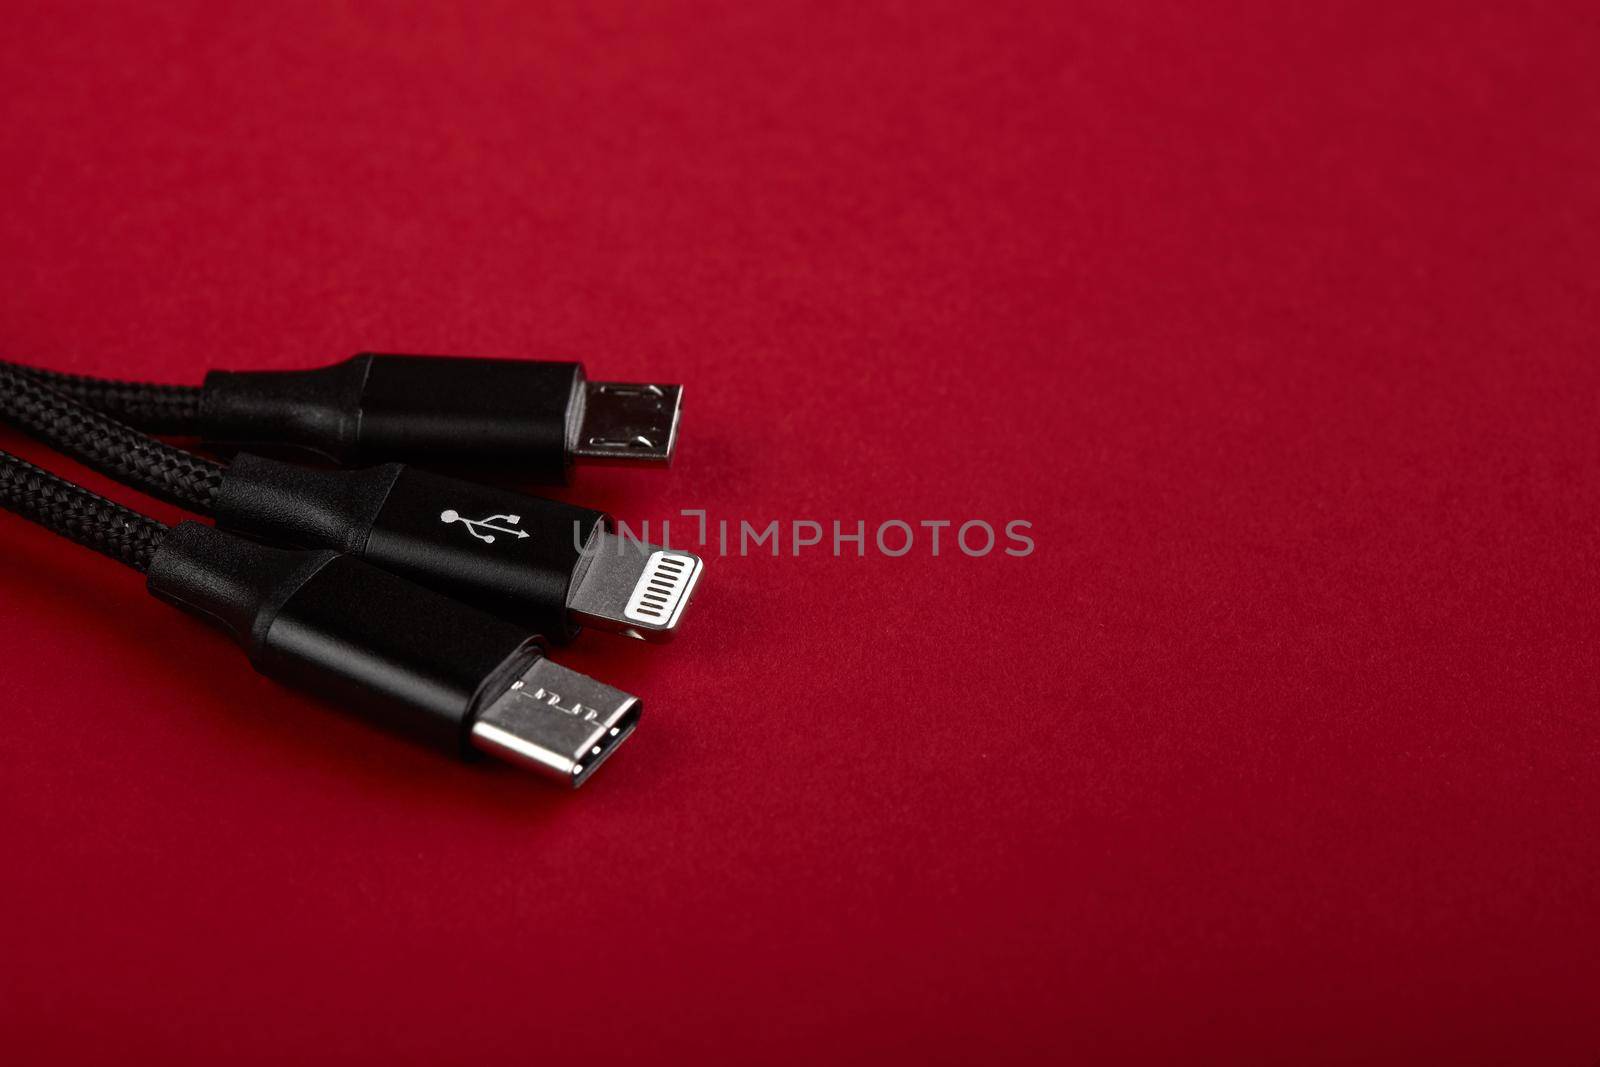 Closeup Shot of Universal USB Cable. 3 different cellphone usb charging plugs adapter from USB by EvgeniyQW